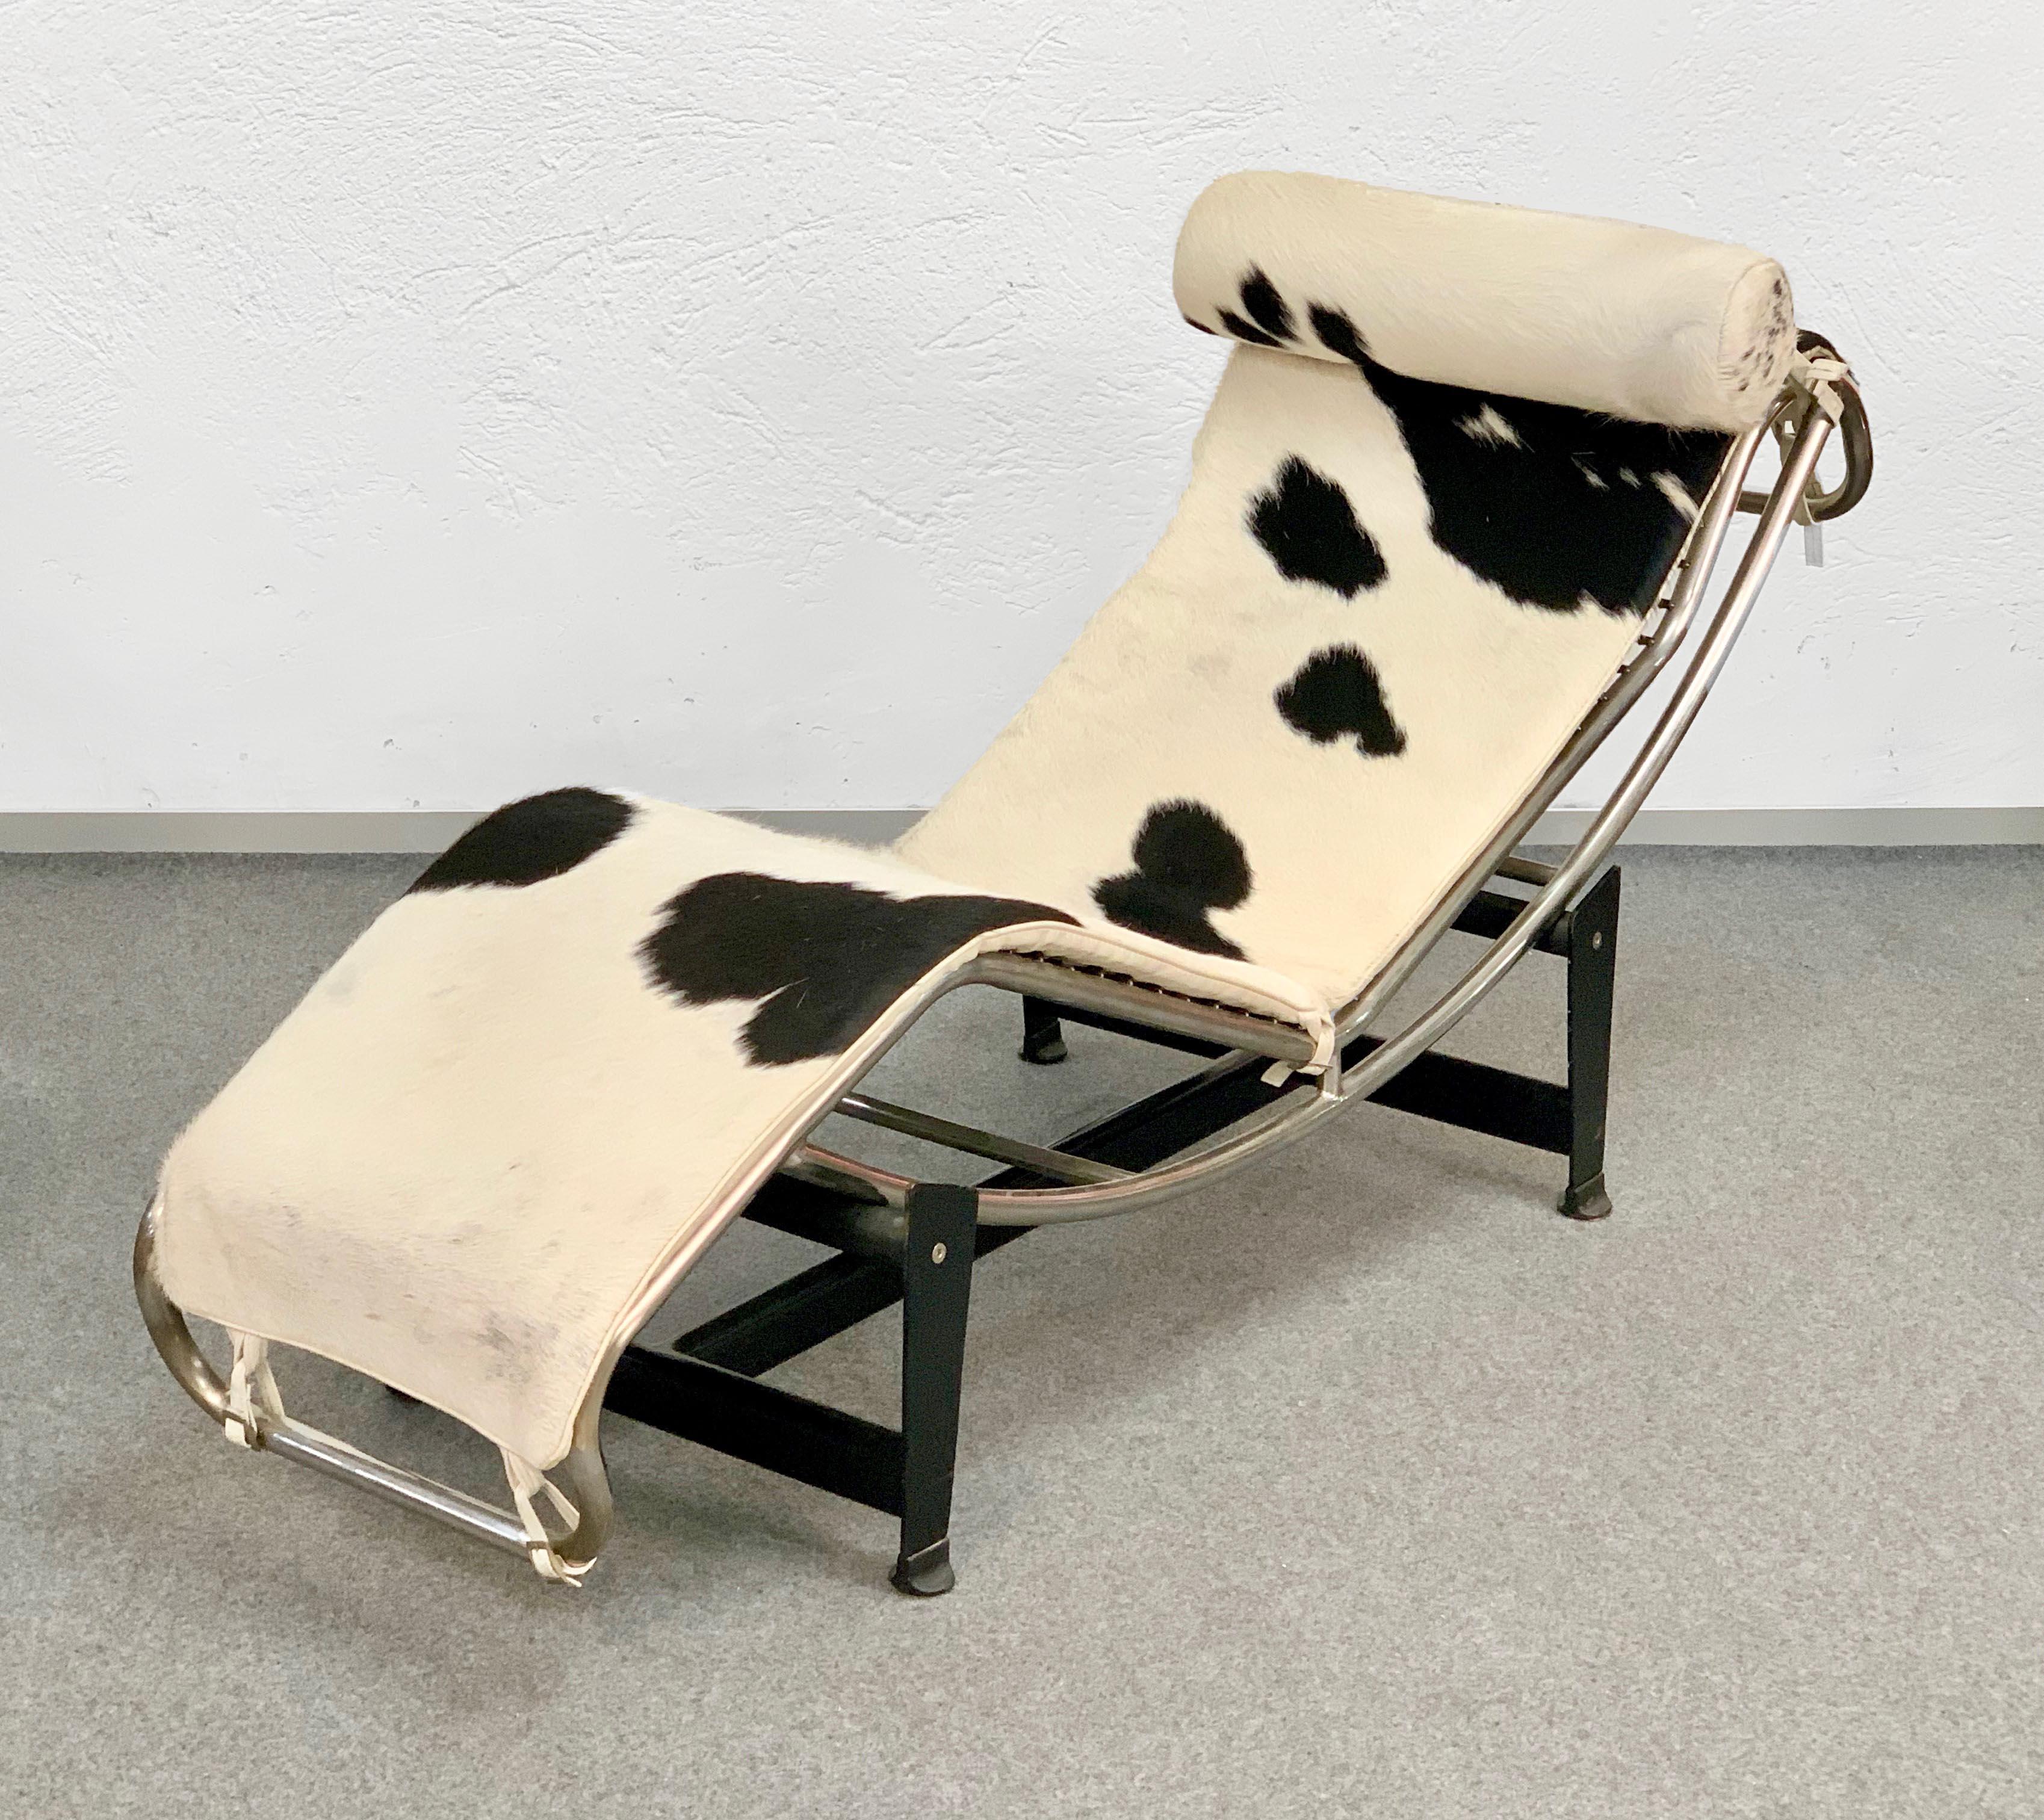 Italian Midcentury Le Corbusier and Perriand Steel and Skin LC4 Chaise Longue, 1980s